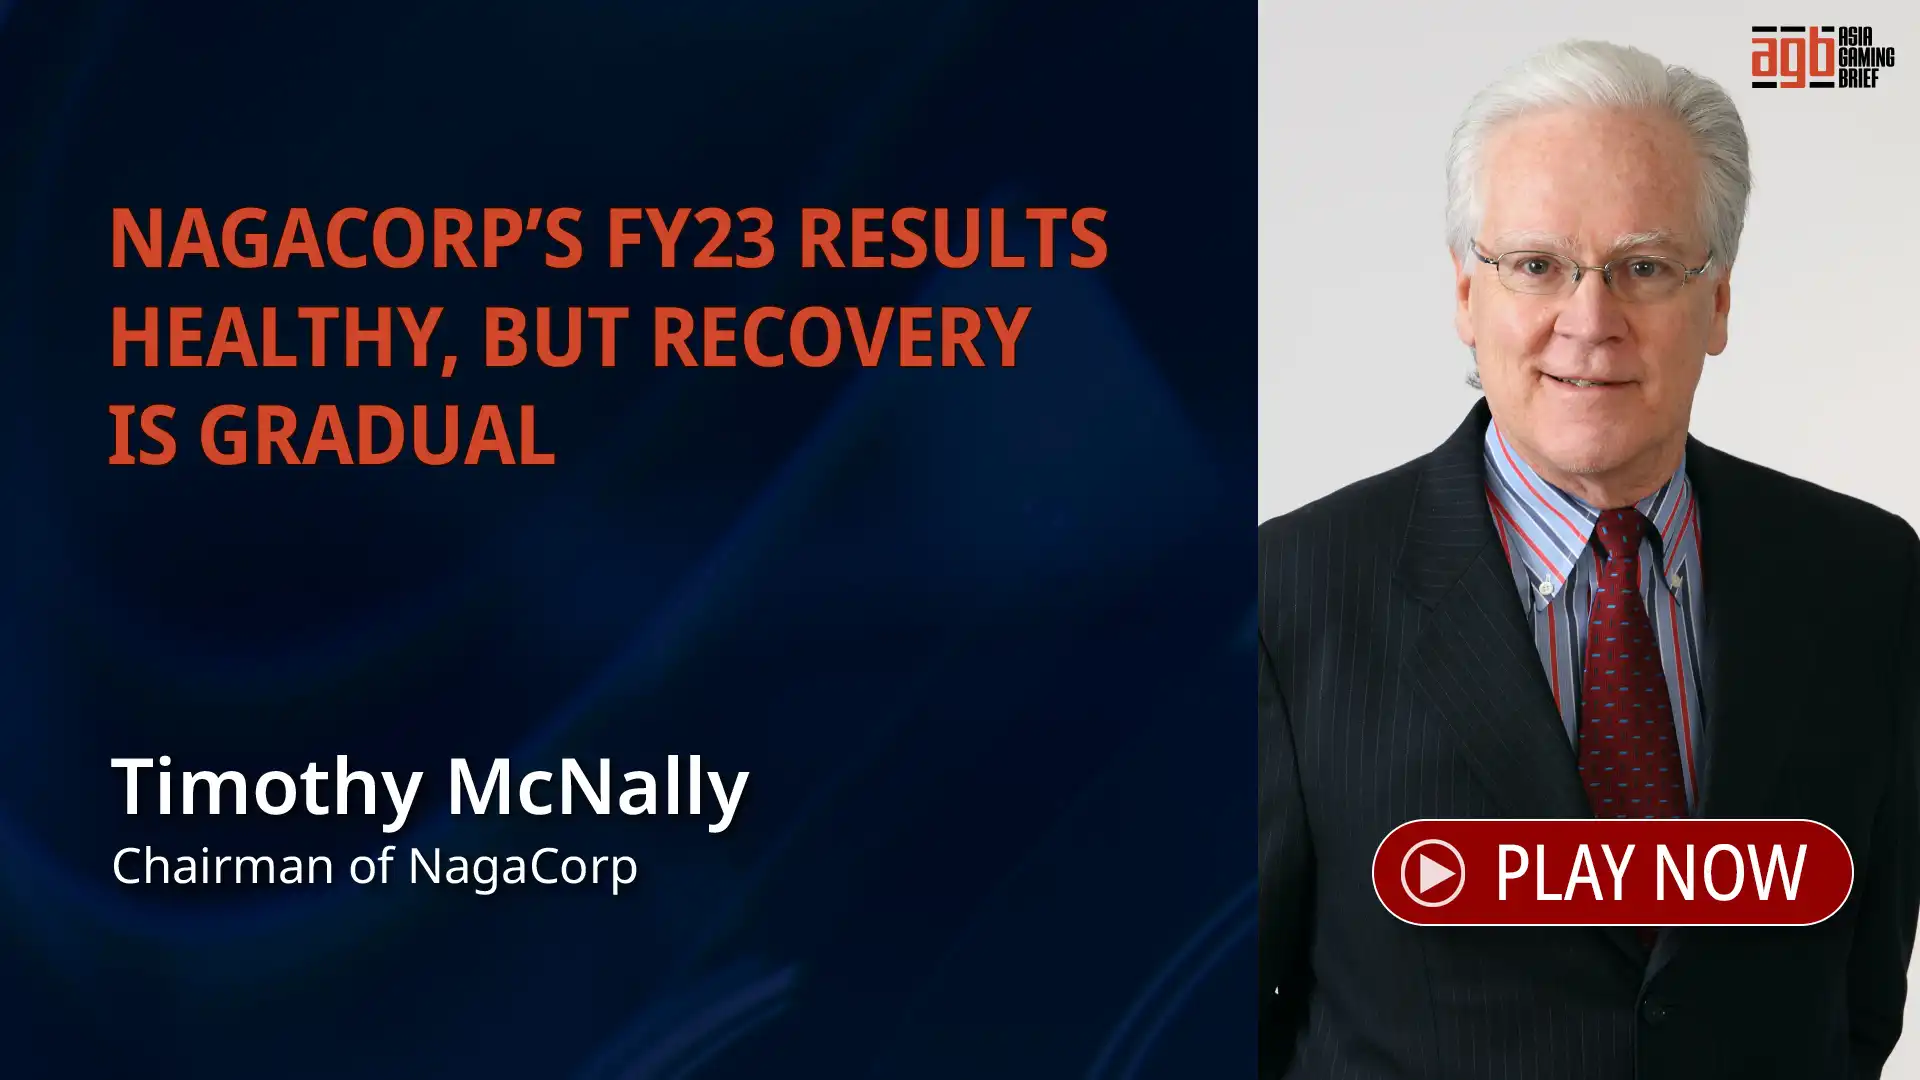 NagaCorp’s FY23 results healthy, but recovery is gradual, Timothy McNally